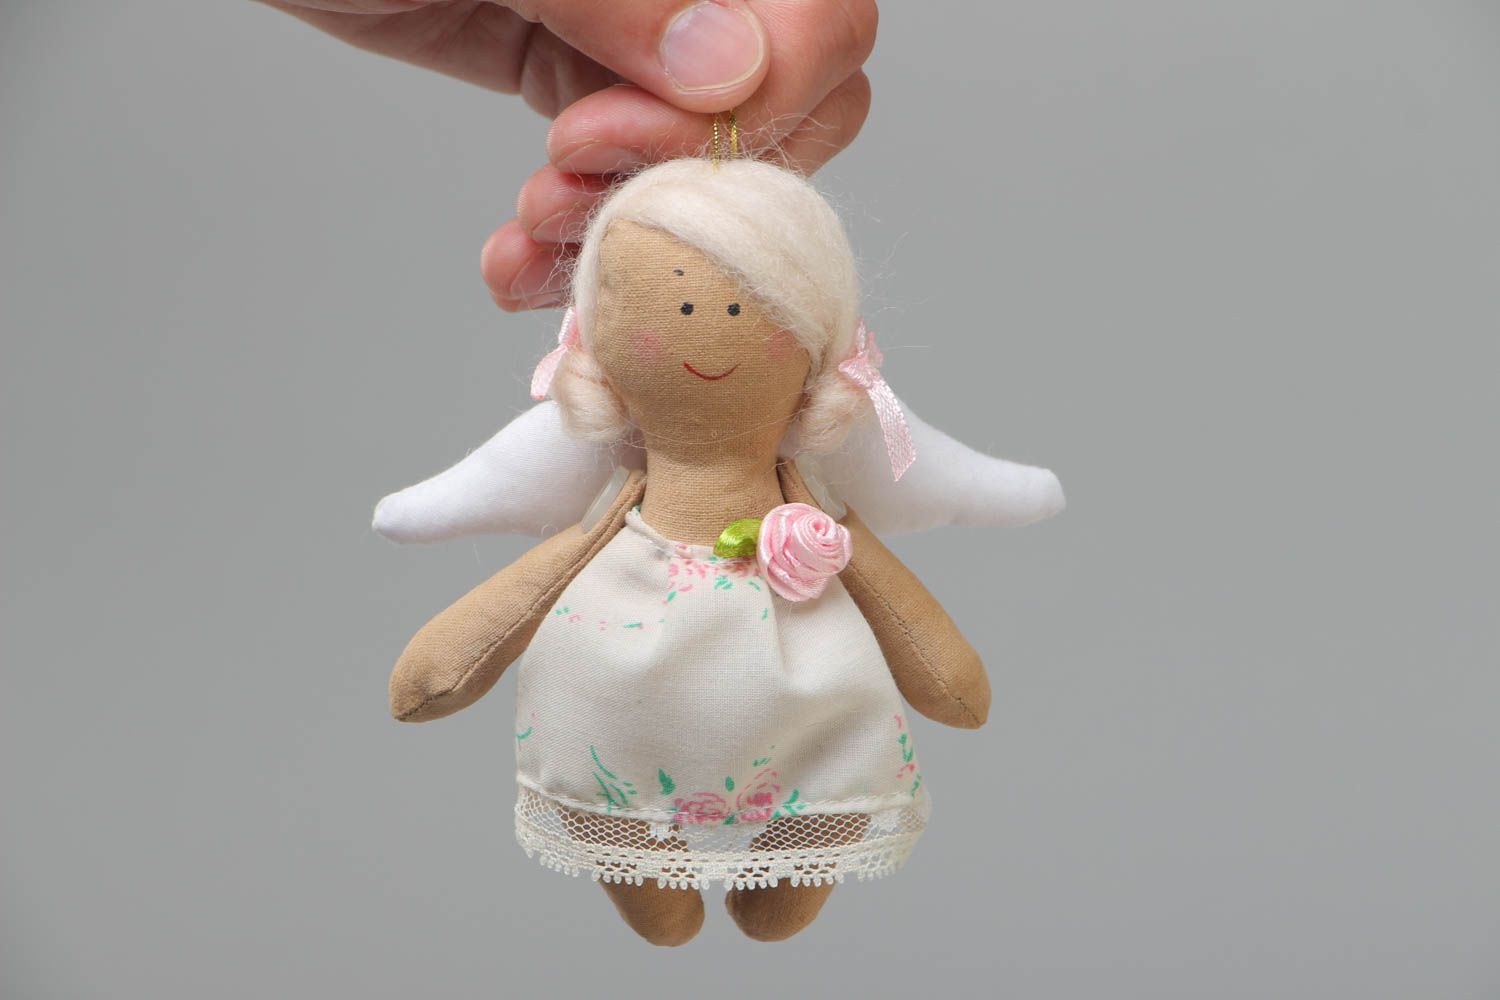 Handmade designer soft doll sewn of cotton in the shape of angel in white dress photo 5